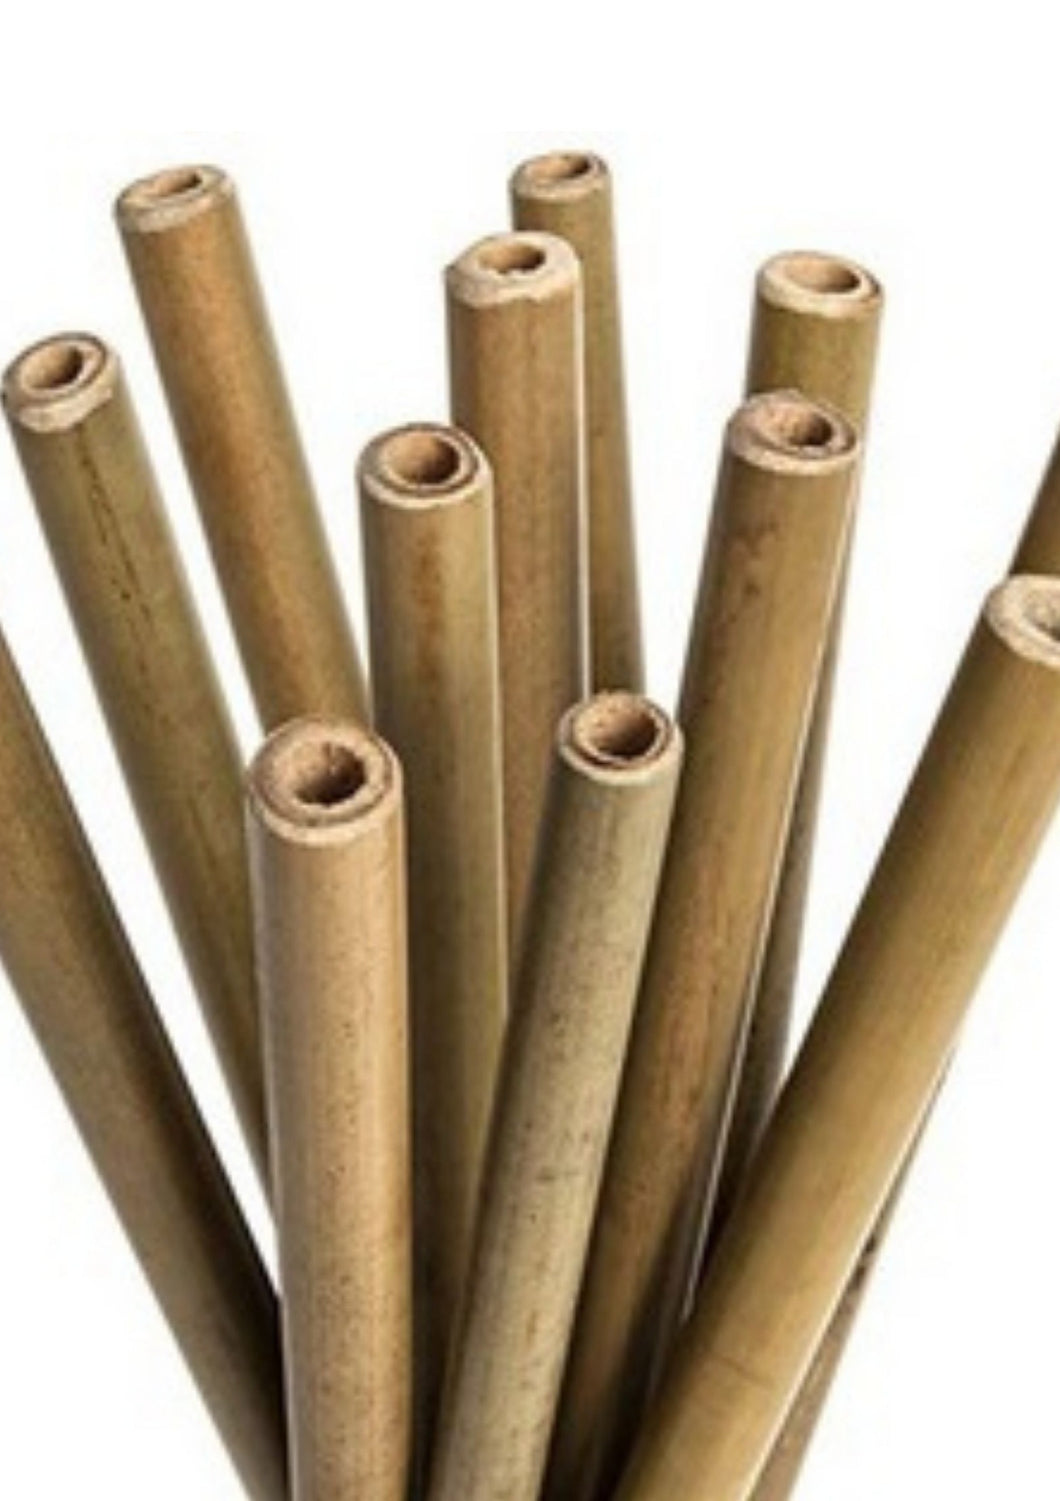 The Last Straw is all about reducing single use plastic and packaging to the consumer while filling a sustainable need in the world. Reusable straws are the hottest item on the zero waste market right now; Canadians are seeking them out for their homes and businesses, give a the all natural BAMBOO straw a try! $4.00